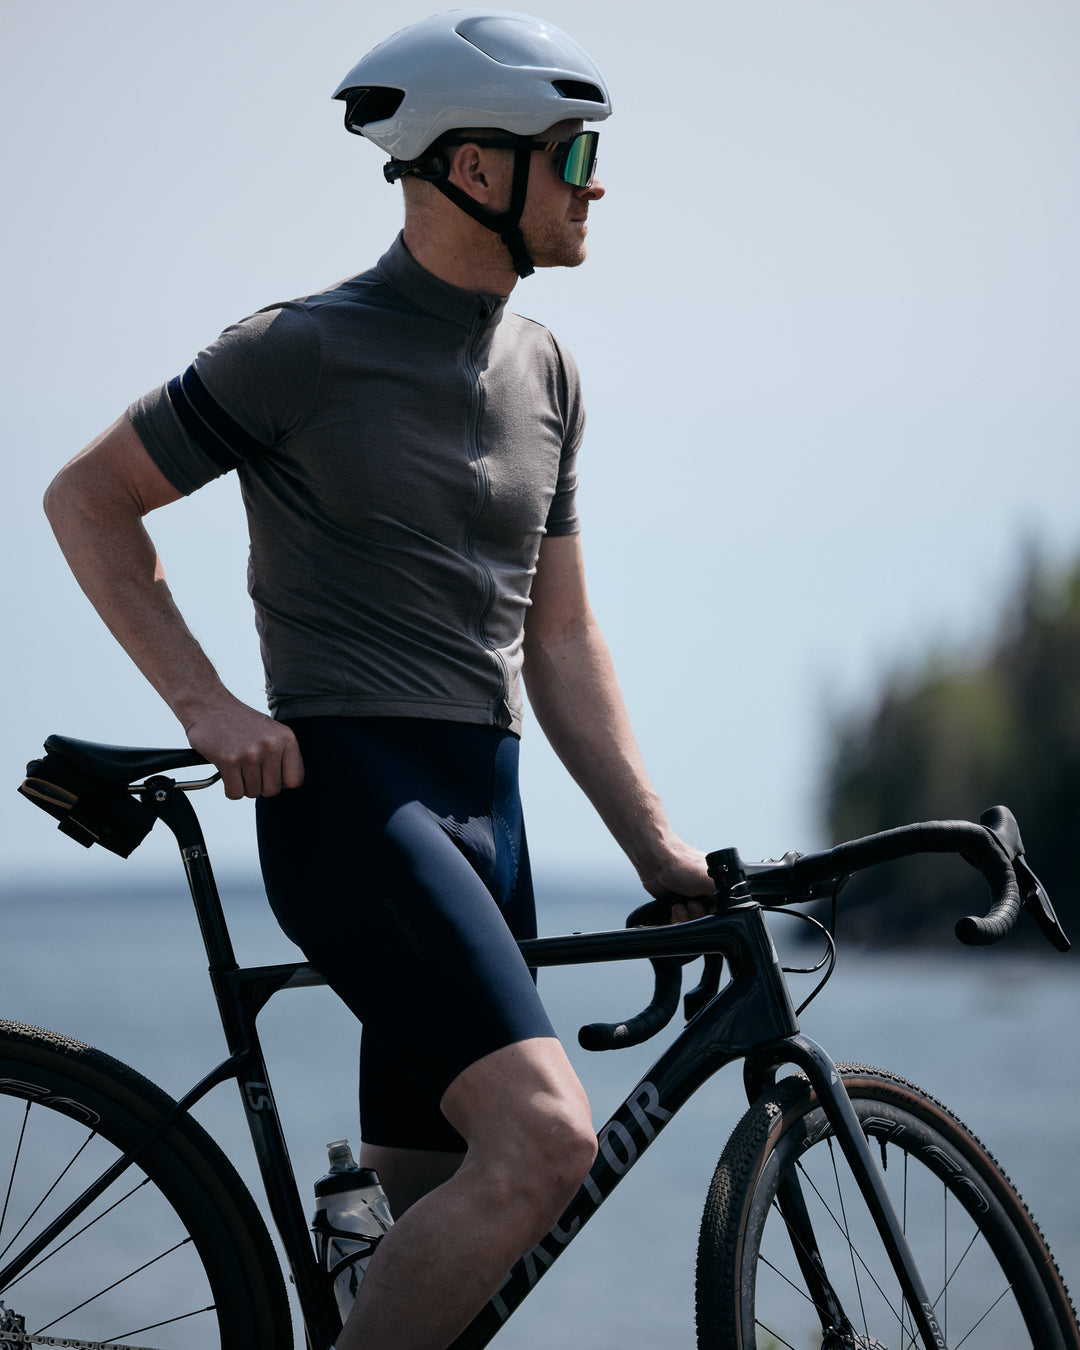 Pinebury Rangeley Long Sleeve Merino Wool Cycling Jersey in Granite. Male cyclist stopped on the coast standing over his bike looking to the side. Wearing a grey short sleeve jersey and blue bib shorts and white aero helmet.